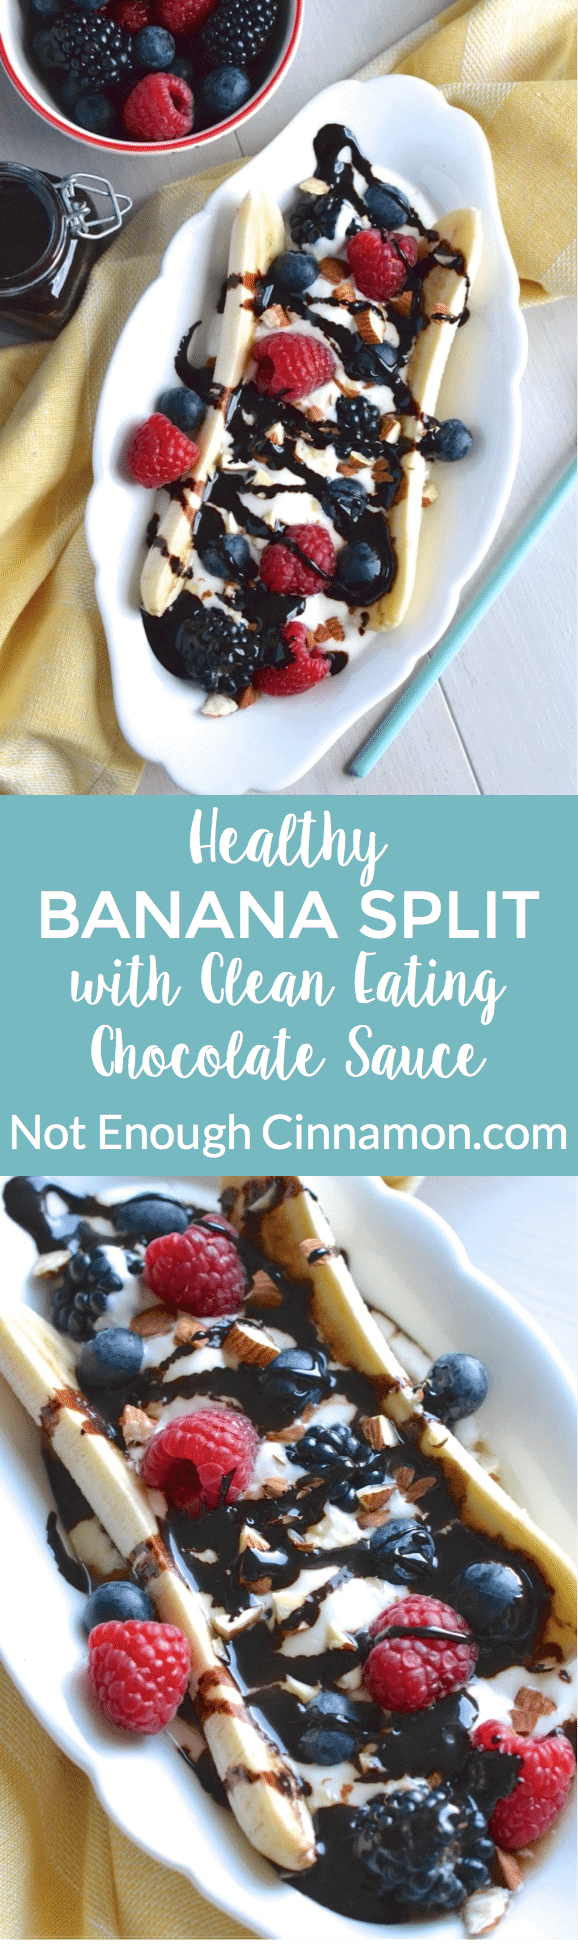 Delicious banana split made healthy but still decadent with a clean eating chocolate sauce! So yummy! Click here to see the recipe on NotEnoughCinnamon.com